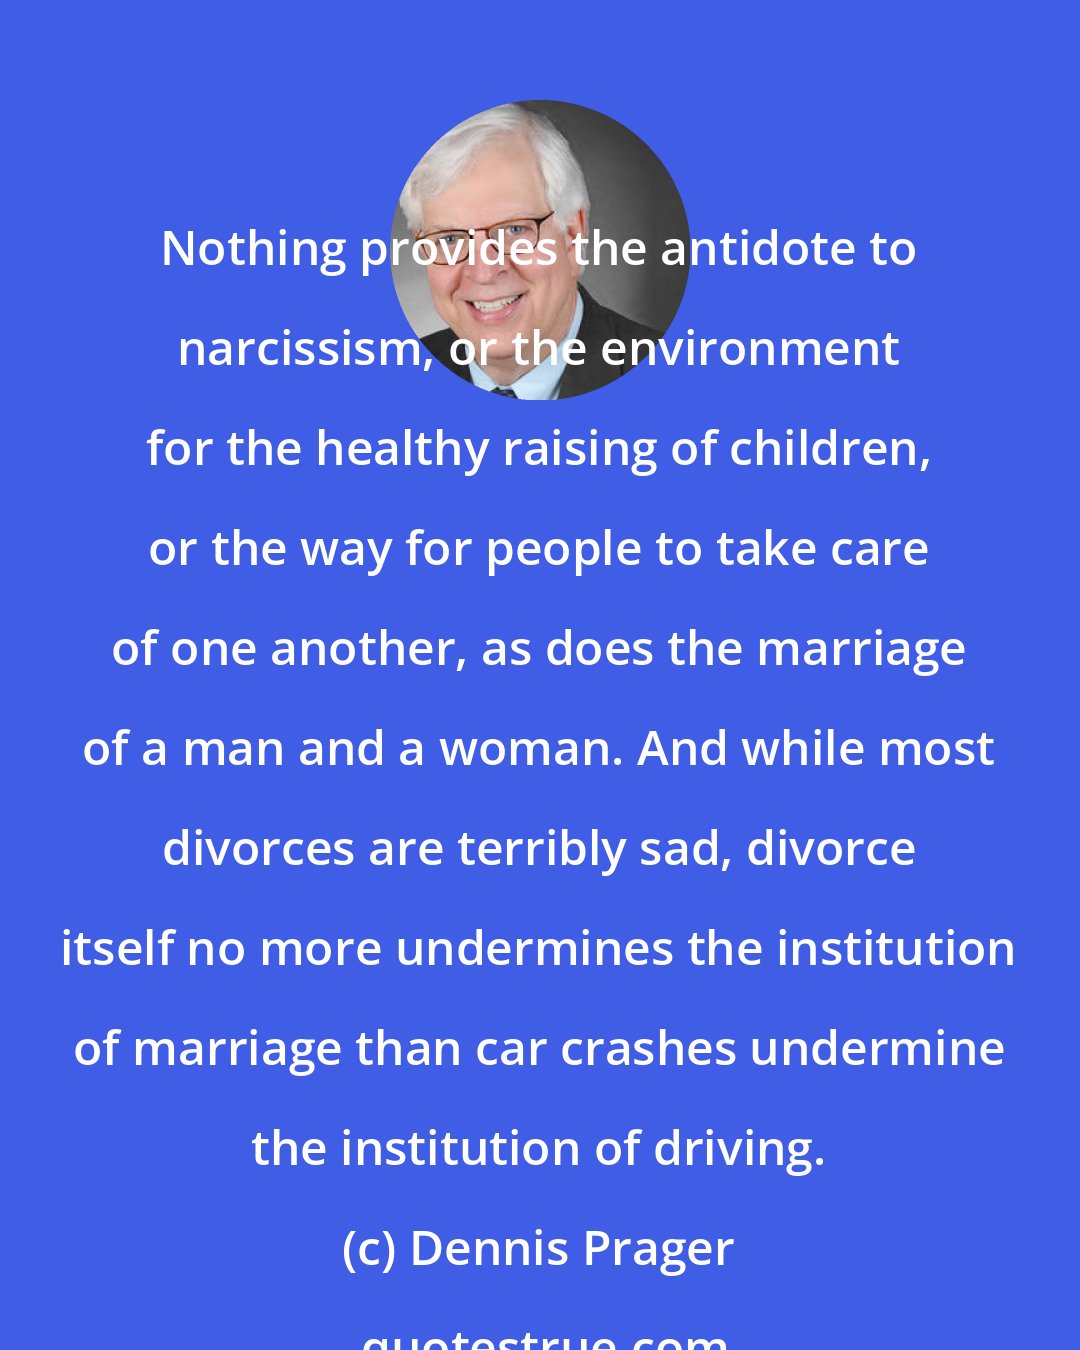 Dennis Prager: Nothing provides the antidote to narcissism, or the environment for the healthy raising of children, or the way for people to take care of one another, as does the marriage of a man and a woman. And while most divorces are terribly sad, divorce itself no more undermines the institution of marriage than car crashes undermine the institution of driving.